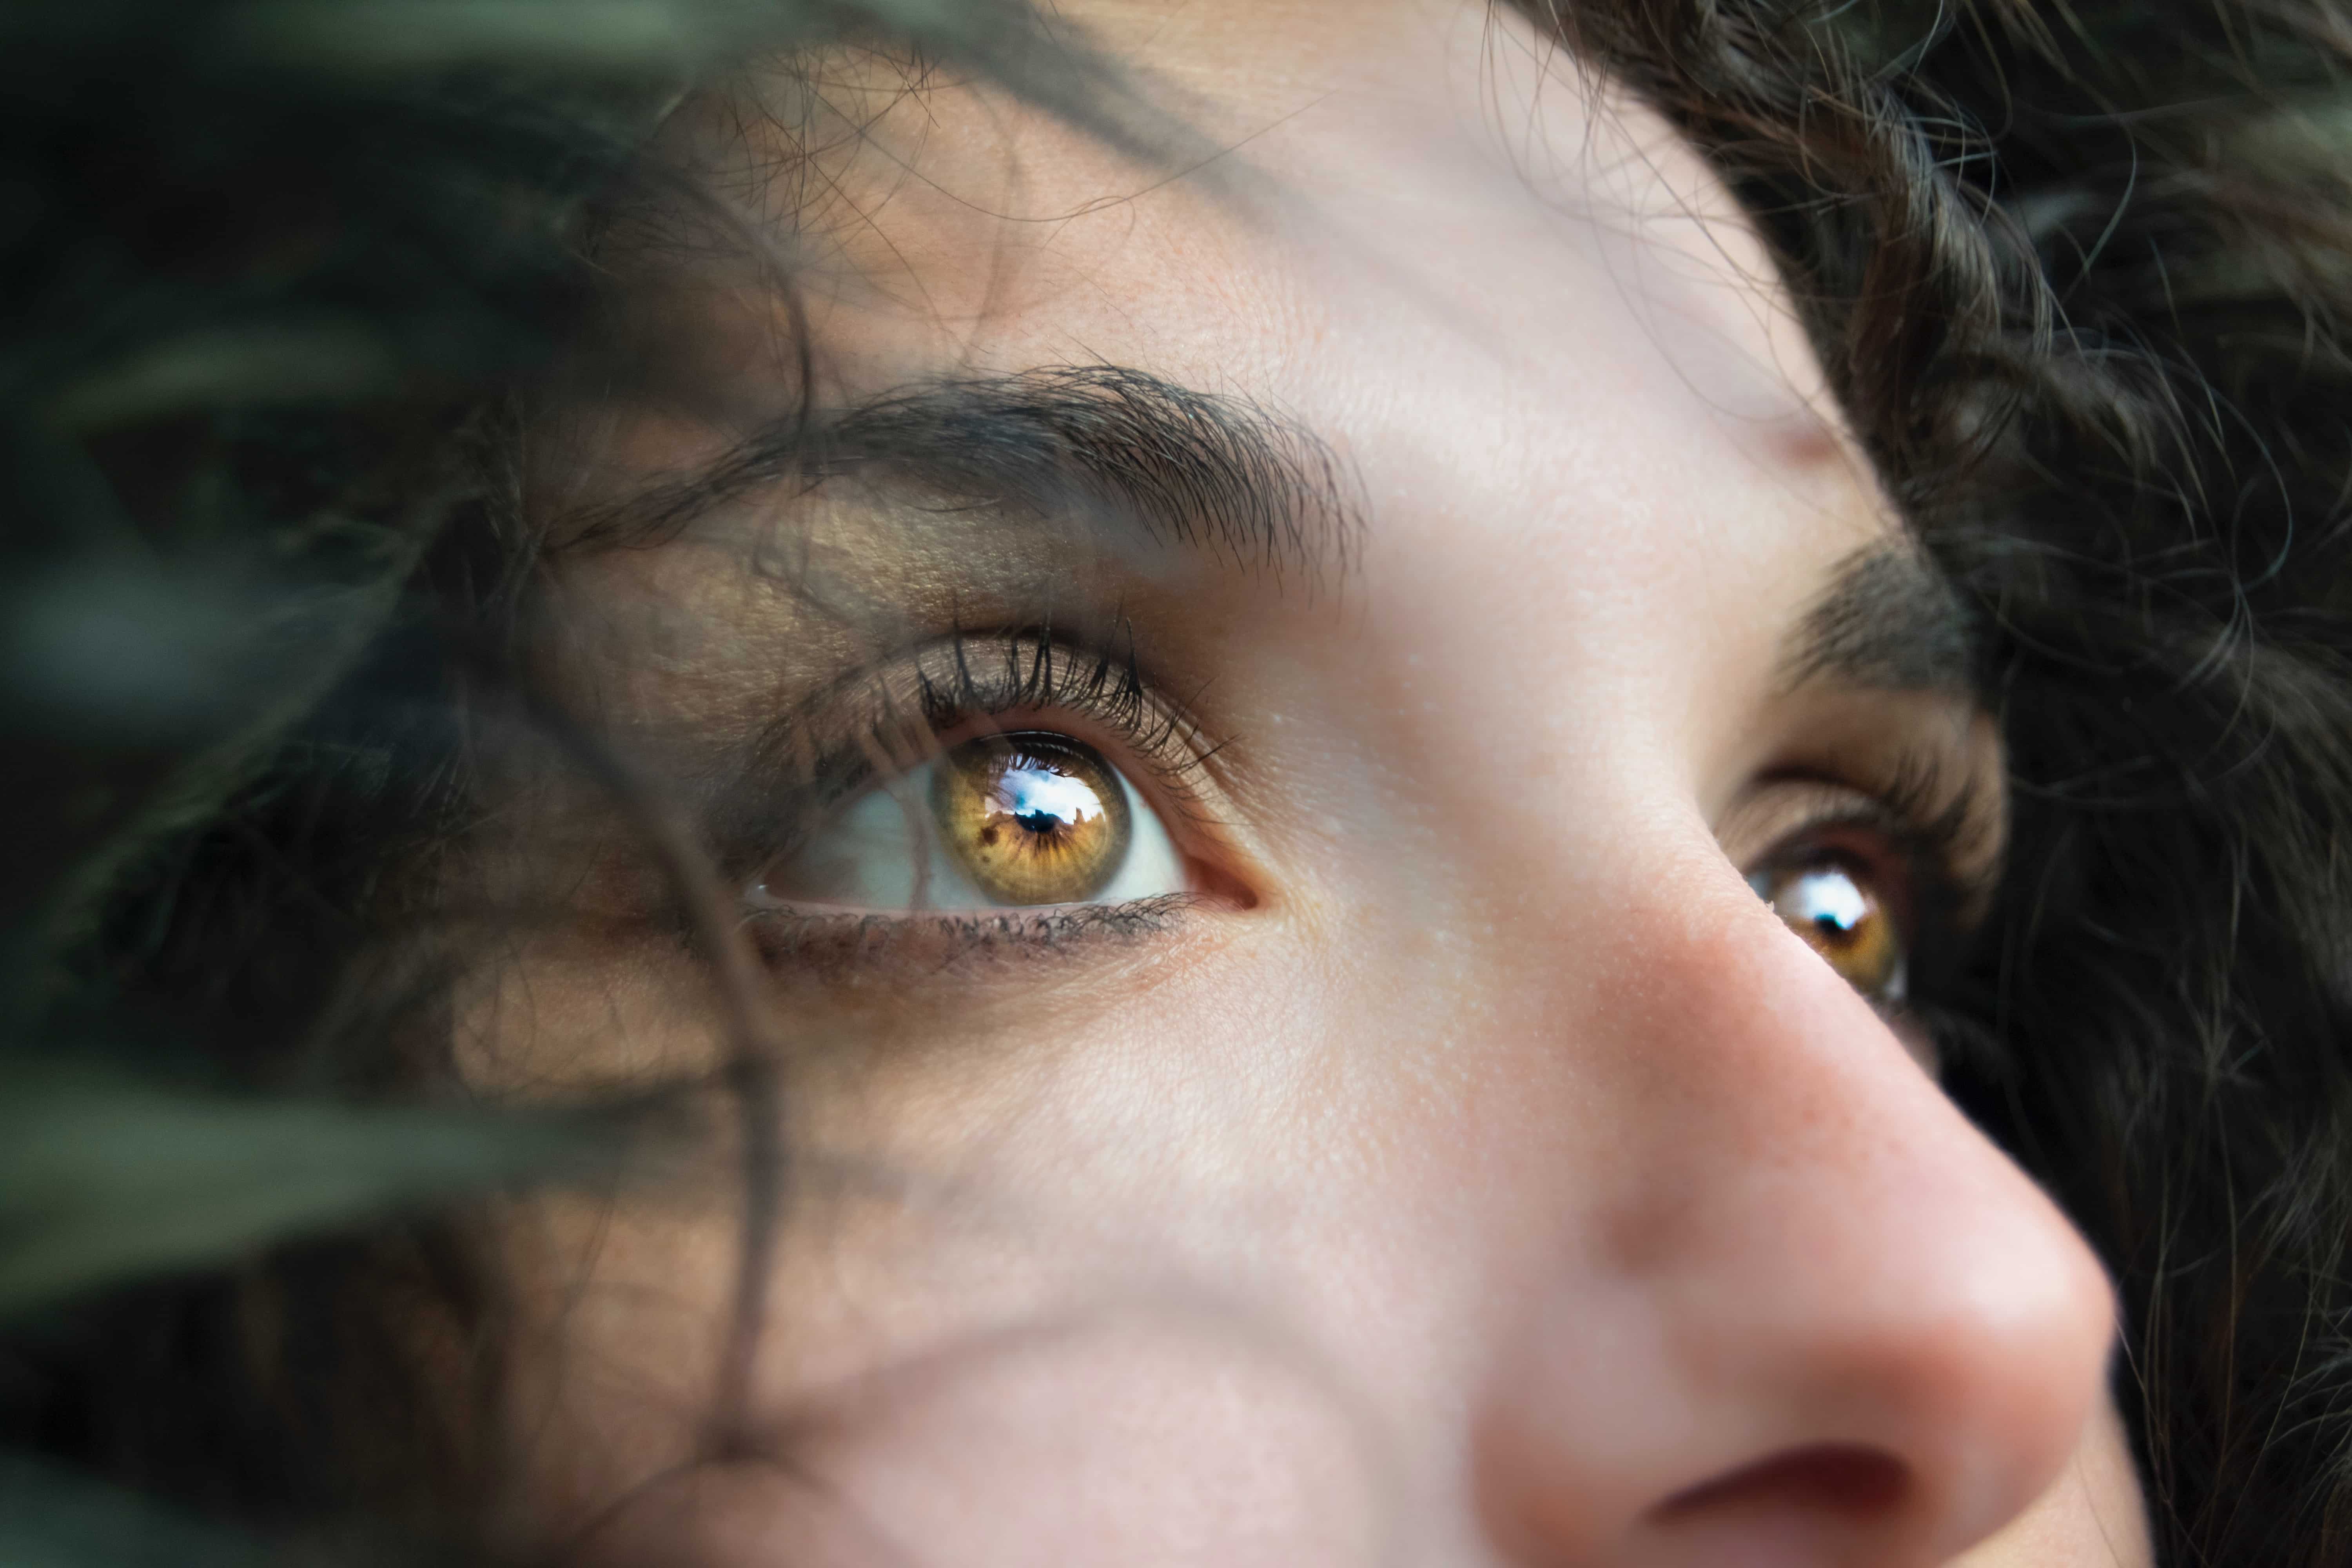 A close-up of a woman's eyes